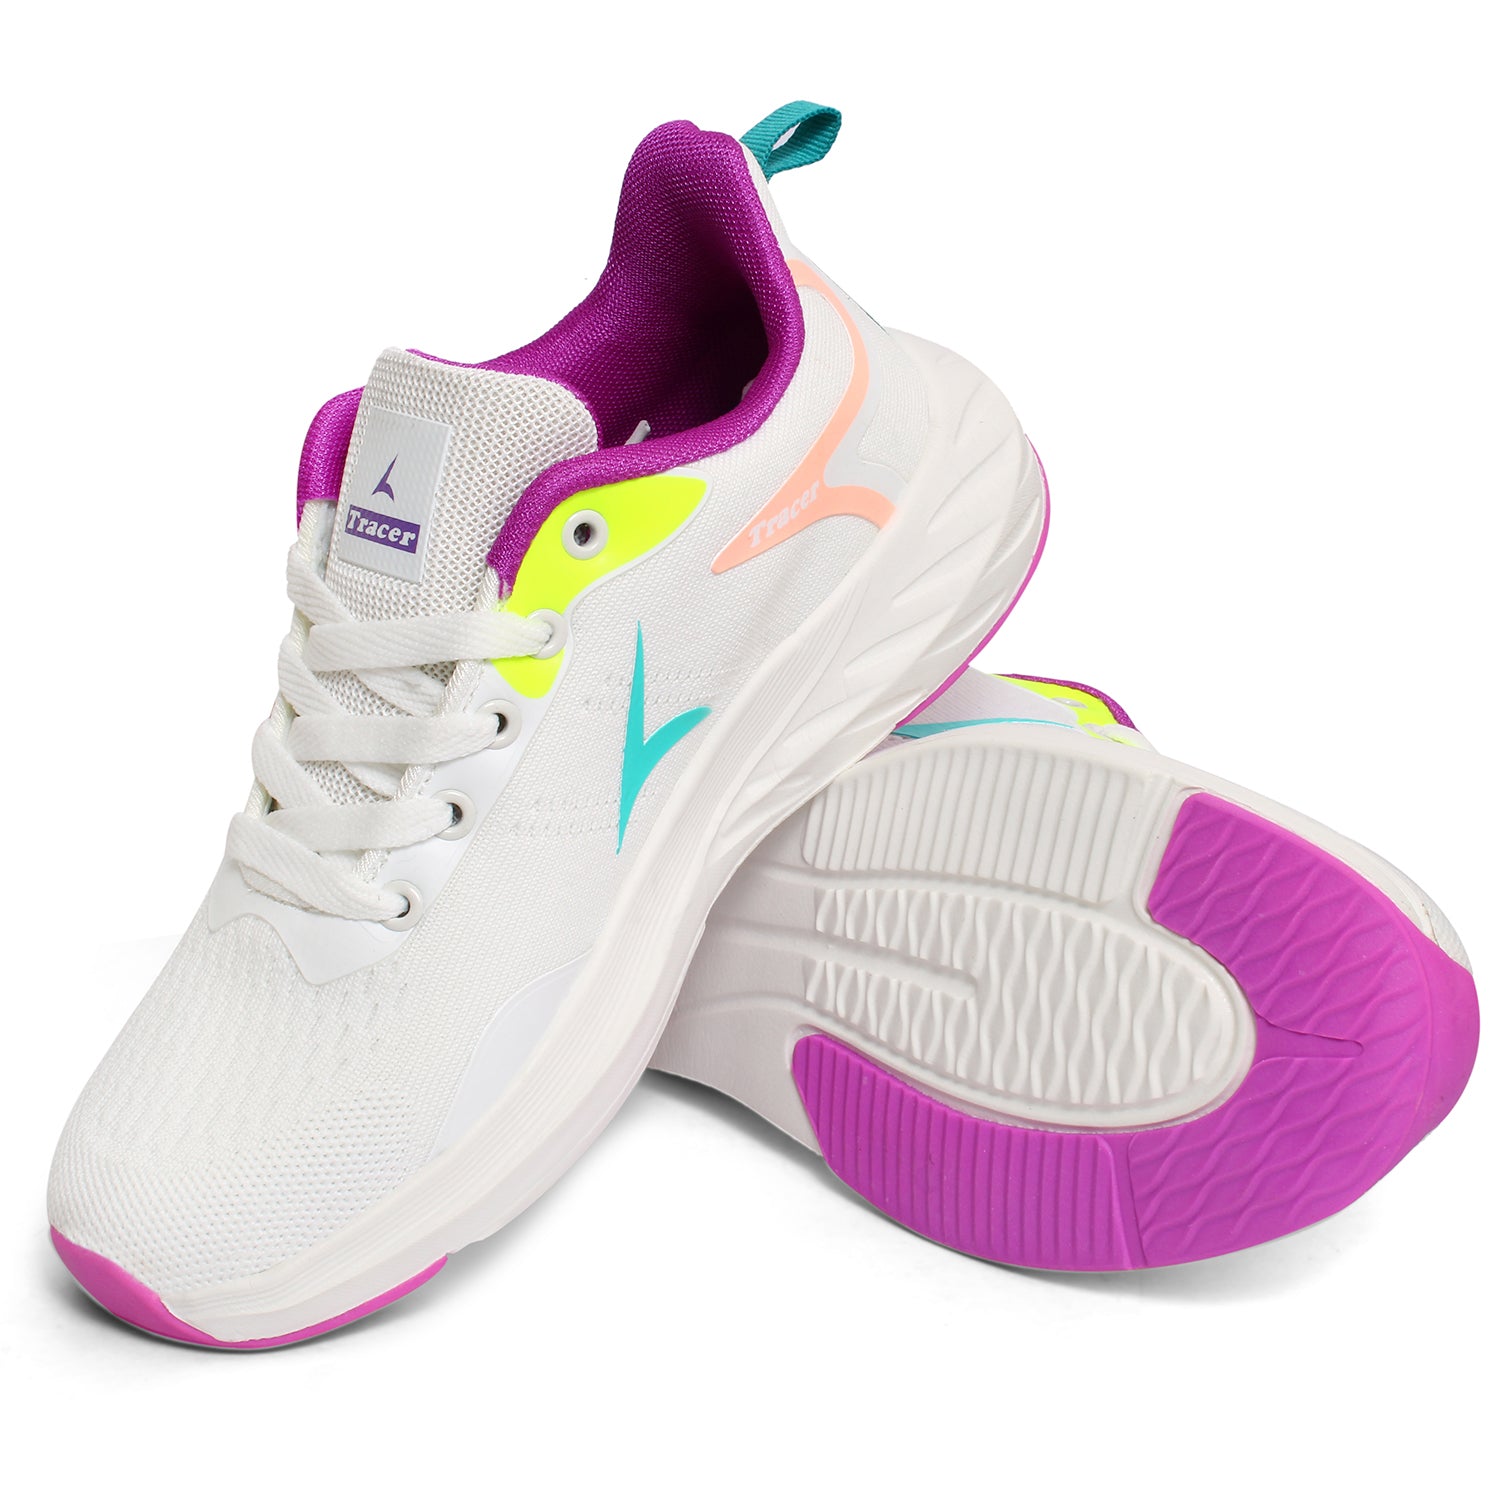 Tracer India Aurora-L-2237 Sneakers for Women's White